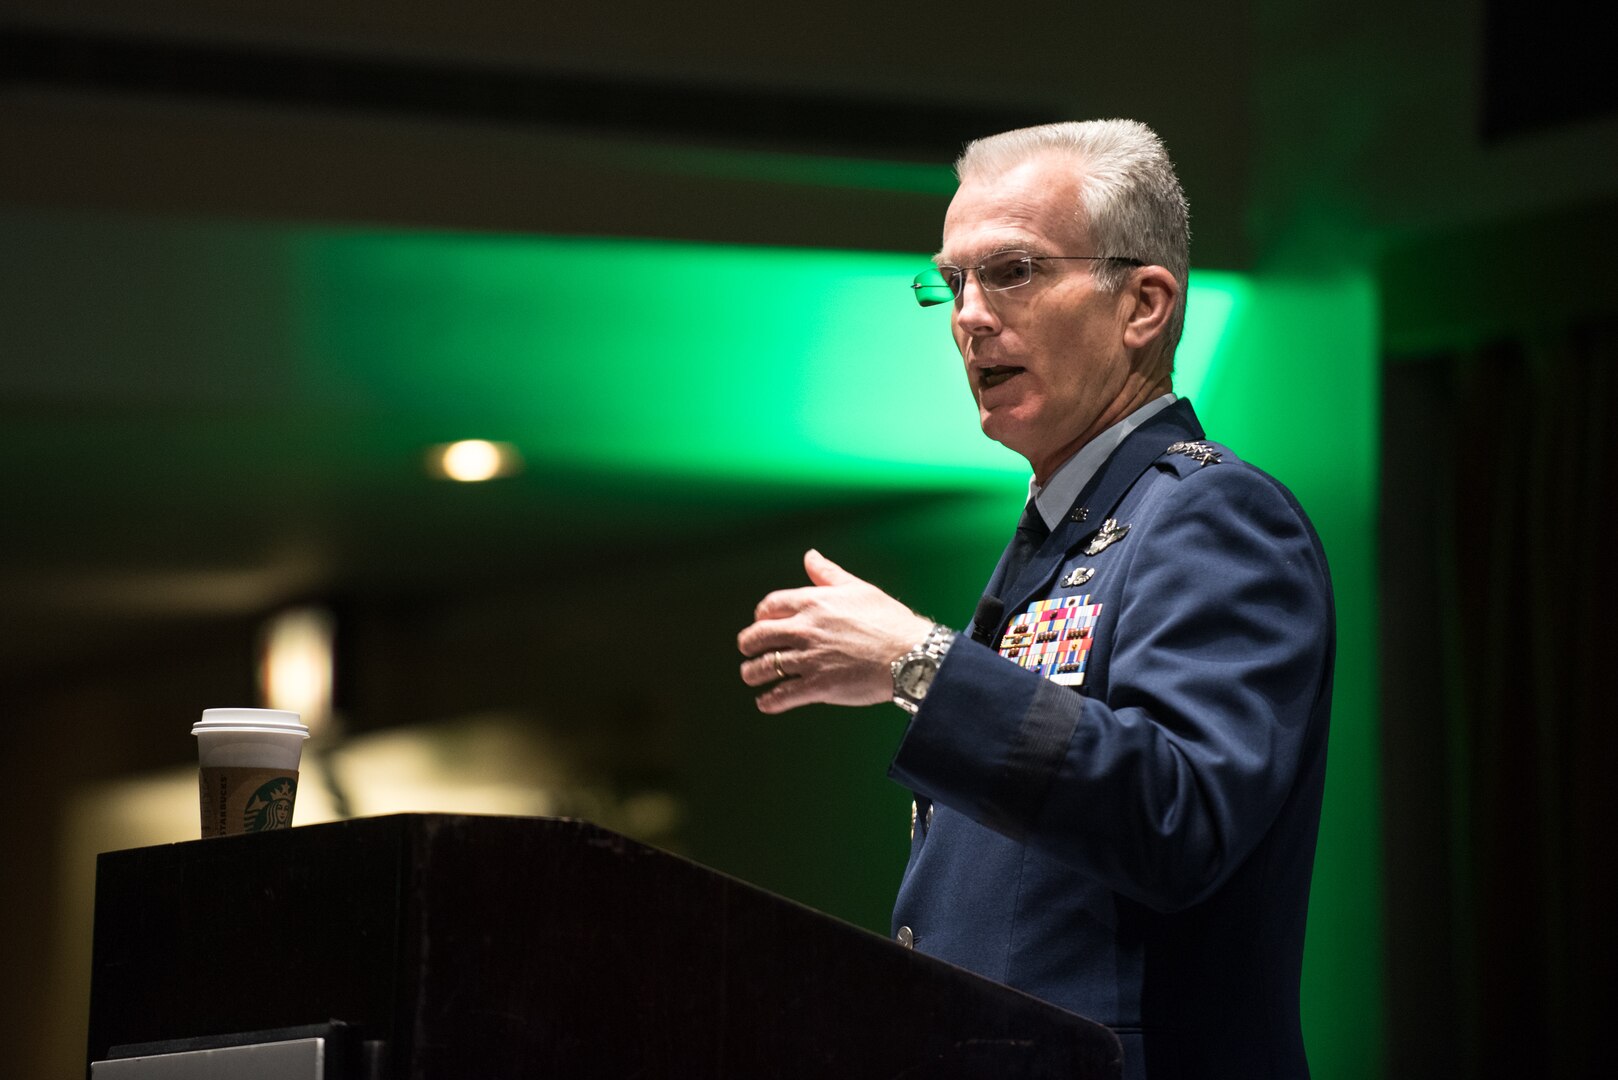 Air Force Gen. Paul J. Selva, vice chairman of the Joint Chiefs of Staff, delivers the keynote address during the 2018 McAleese/Credit Suisse Defense Programs Conference at the Sphinx Club in Washington.